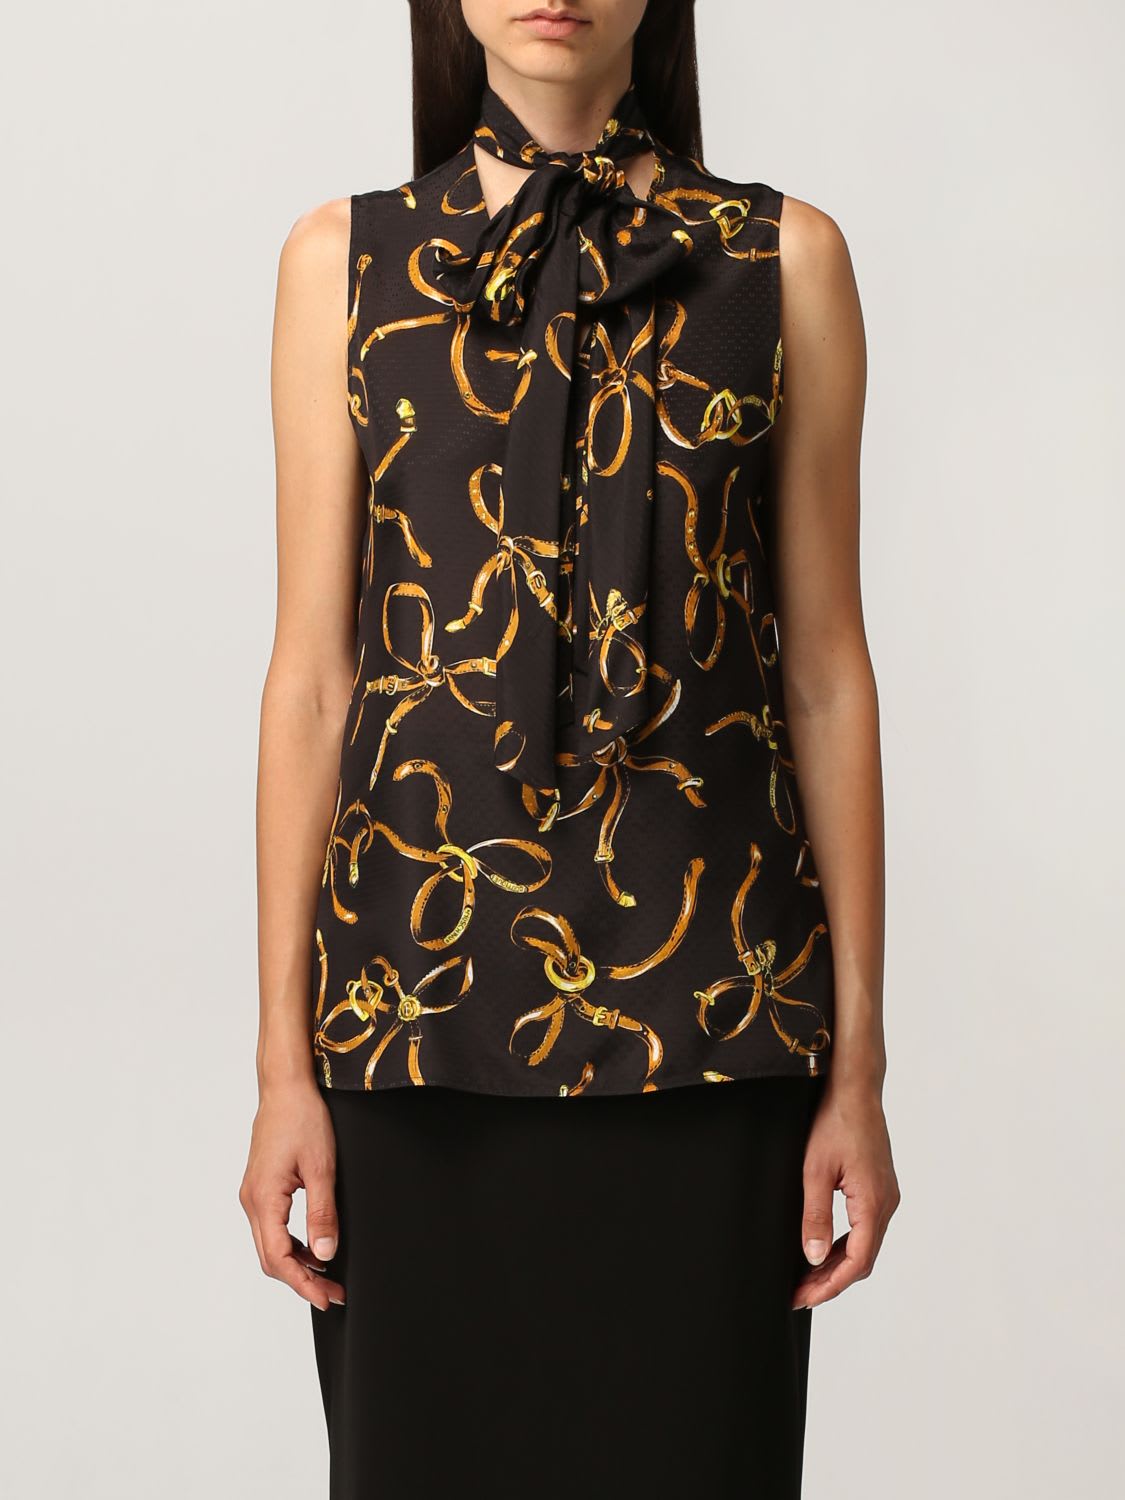 Boutique Moschino Top Moschino Boutique Top With Print